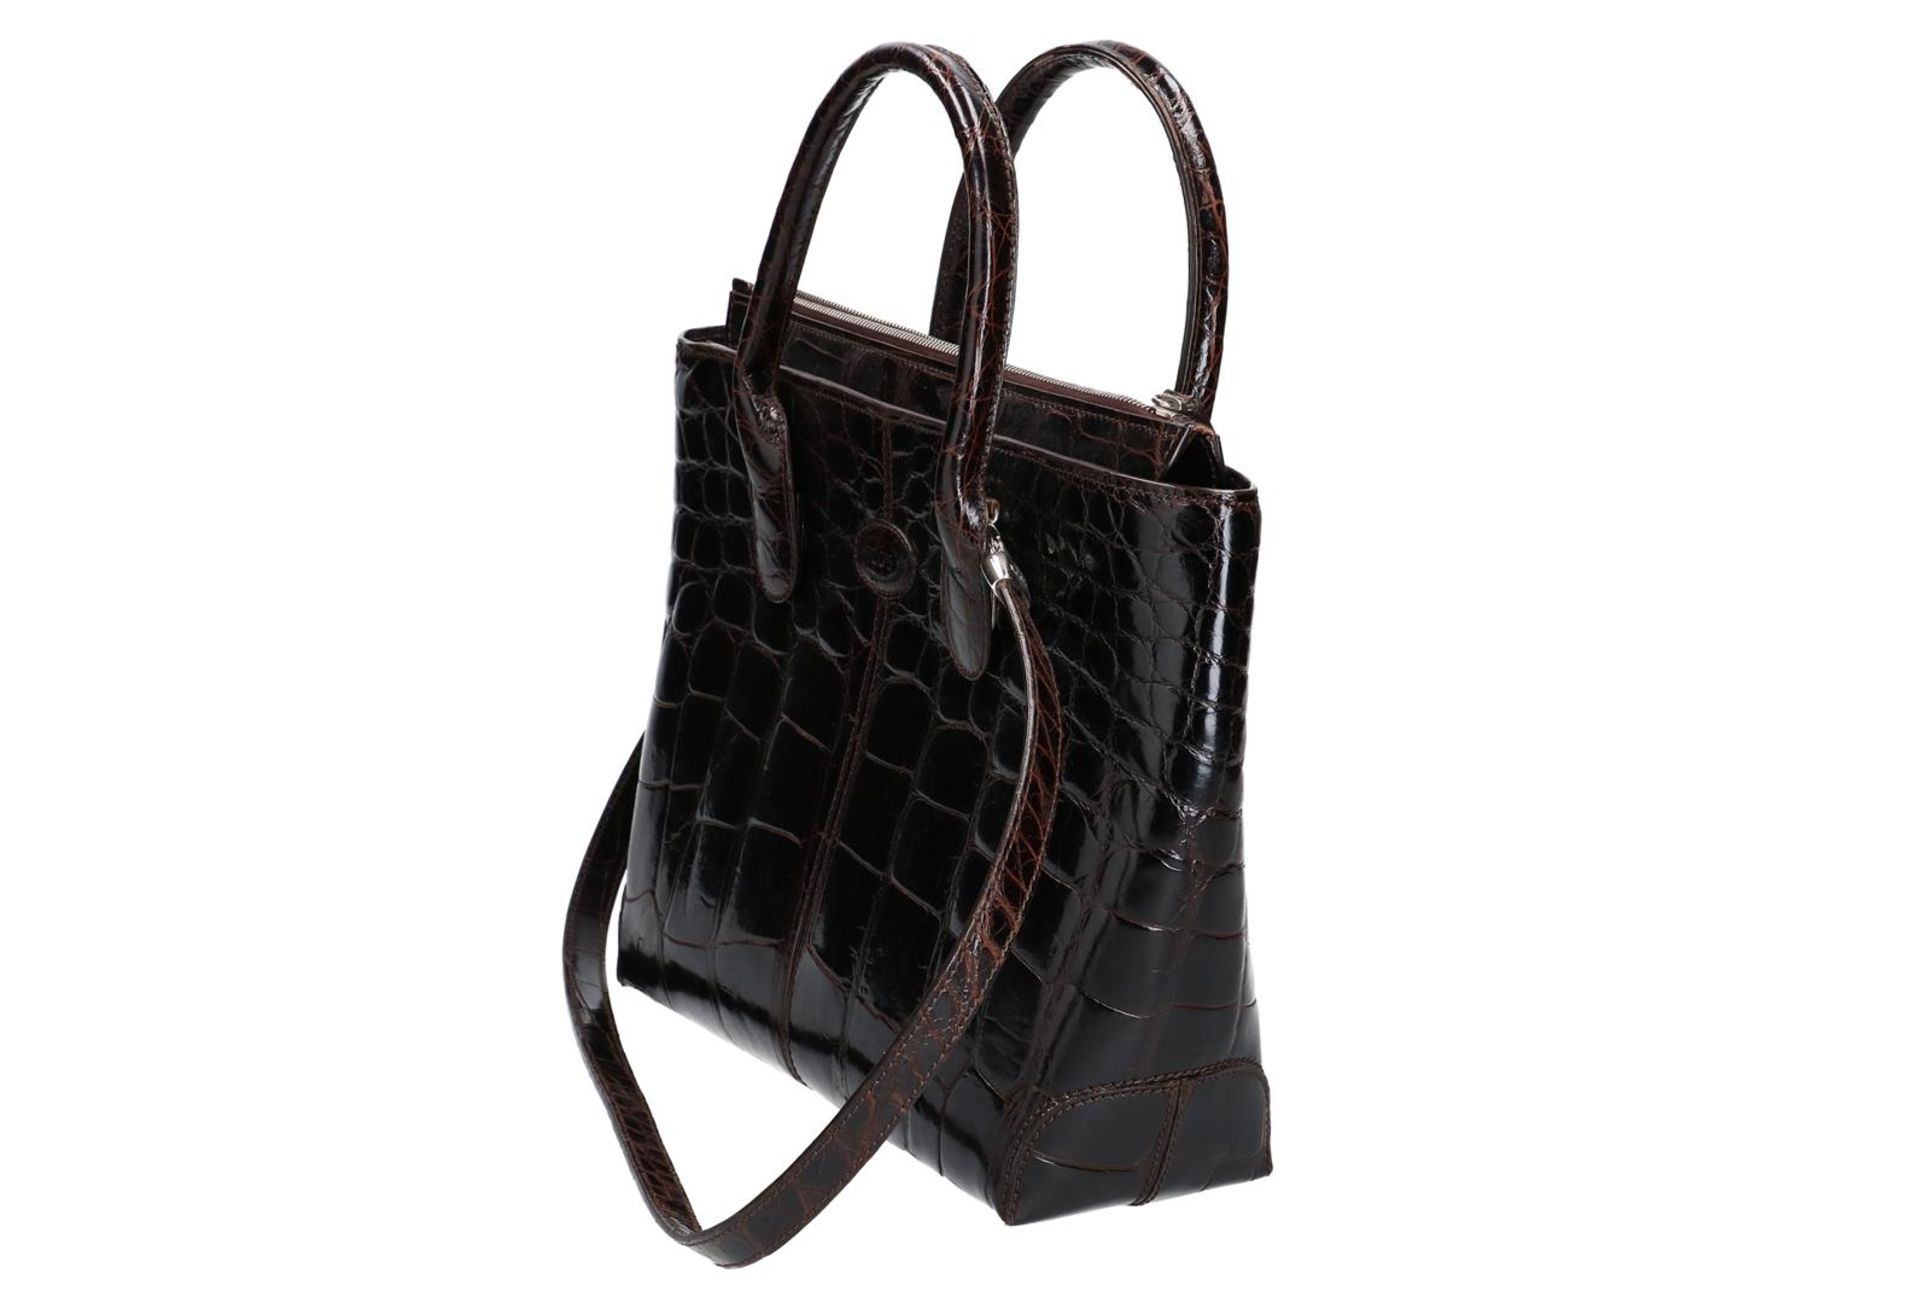 Tods, brown crocodile pattern leather handbag with shoulder strap. H x W x D: 25 x 33 x 10 cm. - Image 2 of 5